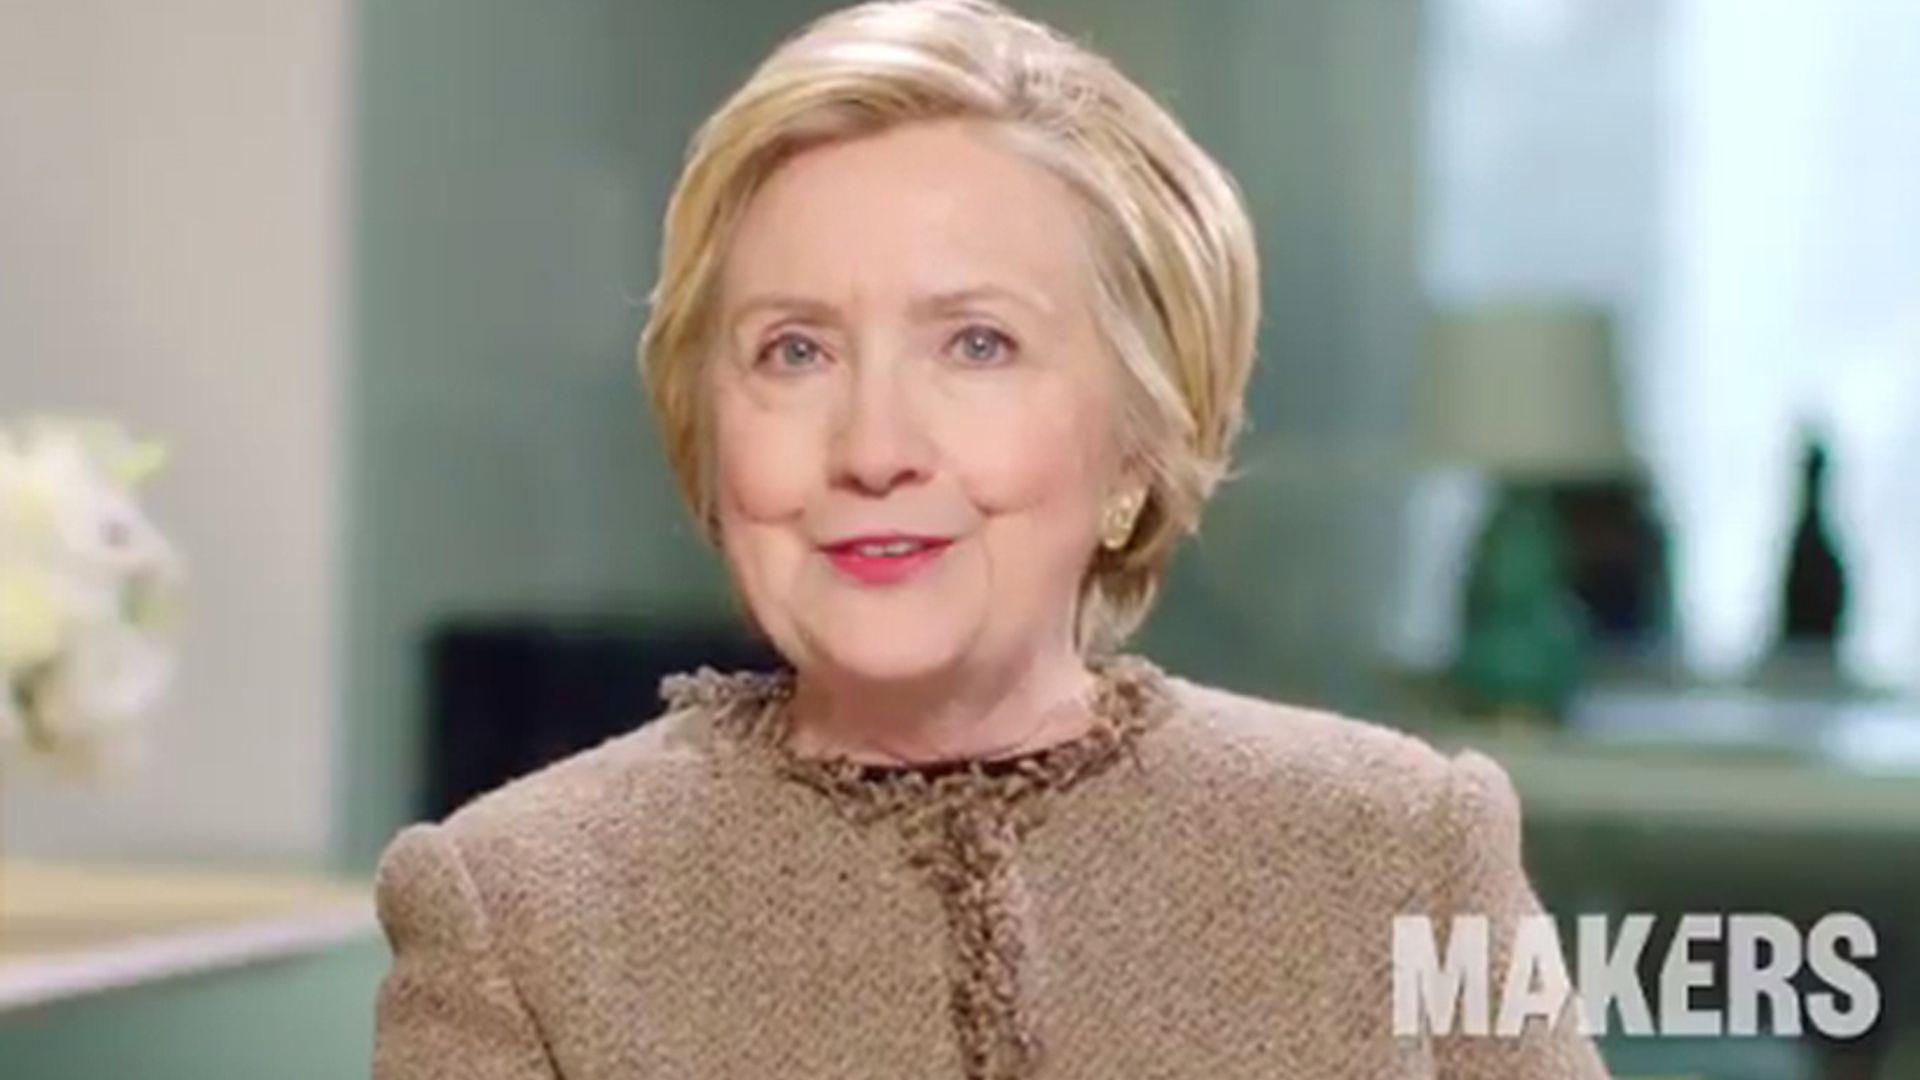 Hillary Clinton says 'future is female' in first post-Trump inauguration video